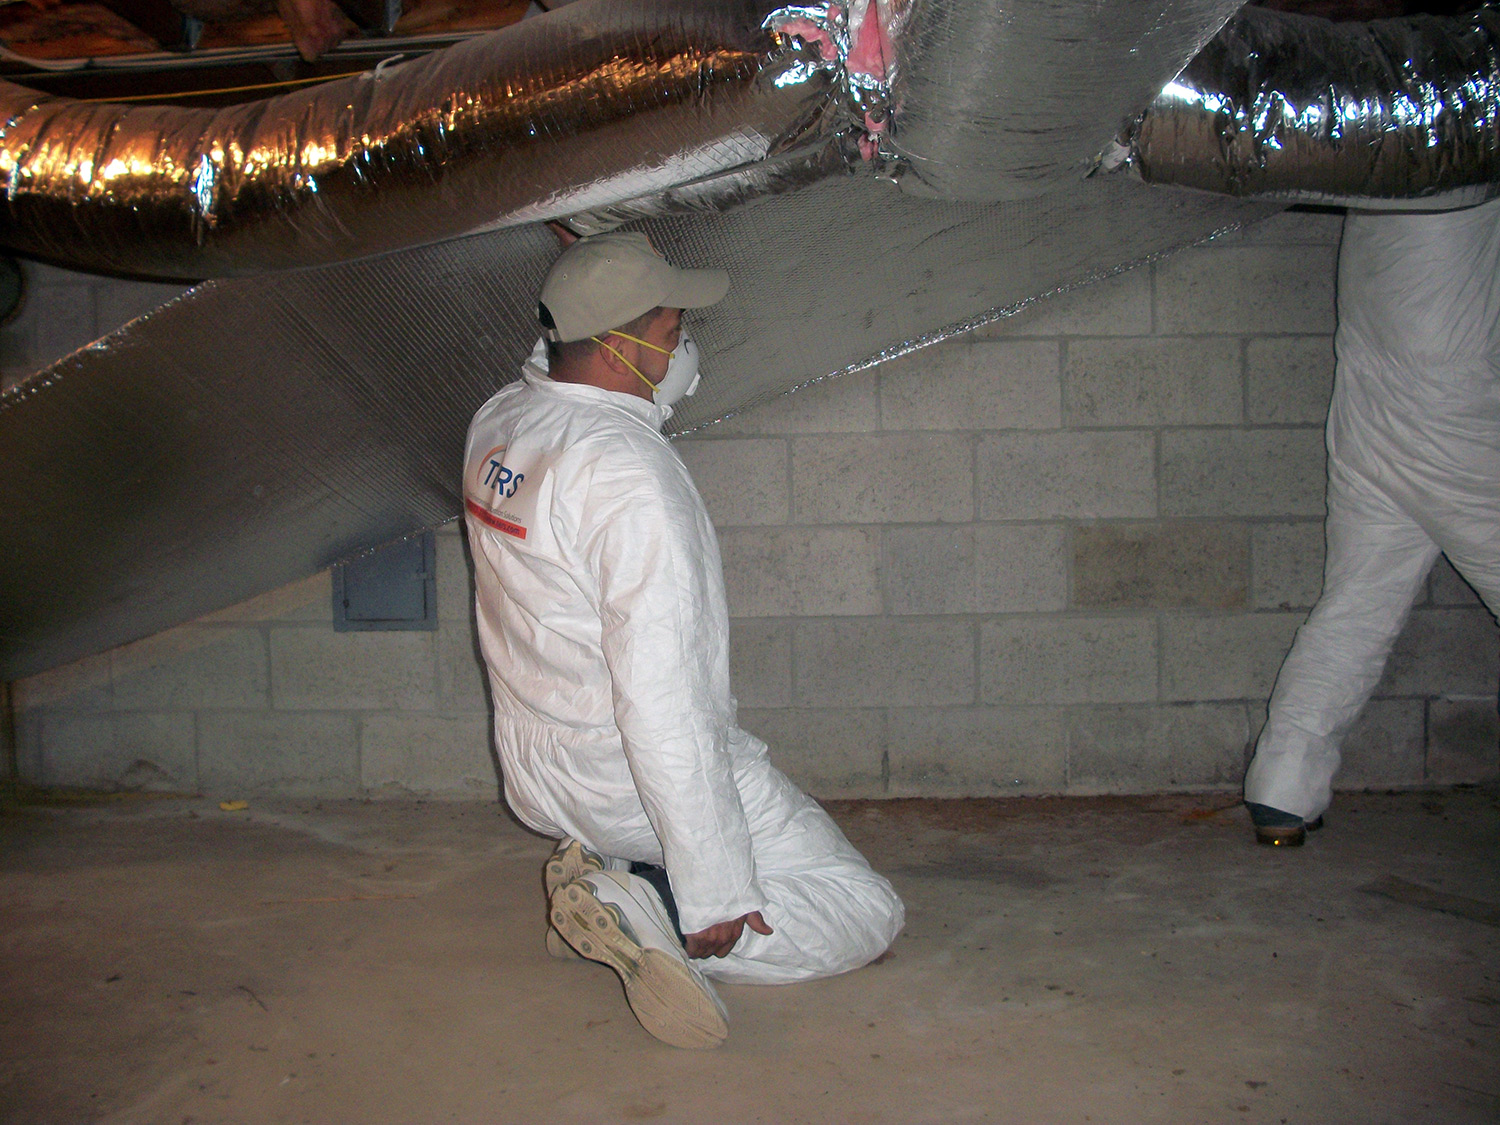 Flood damage remediation in progress in a commercial building's water-damaged basement